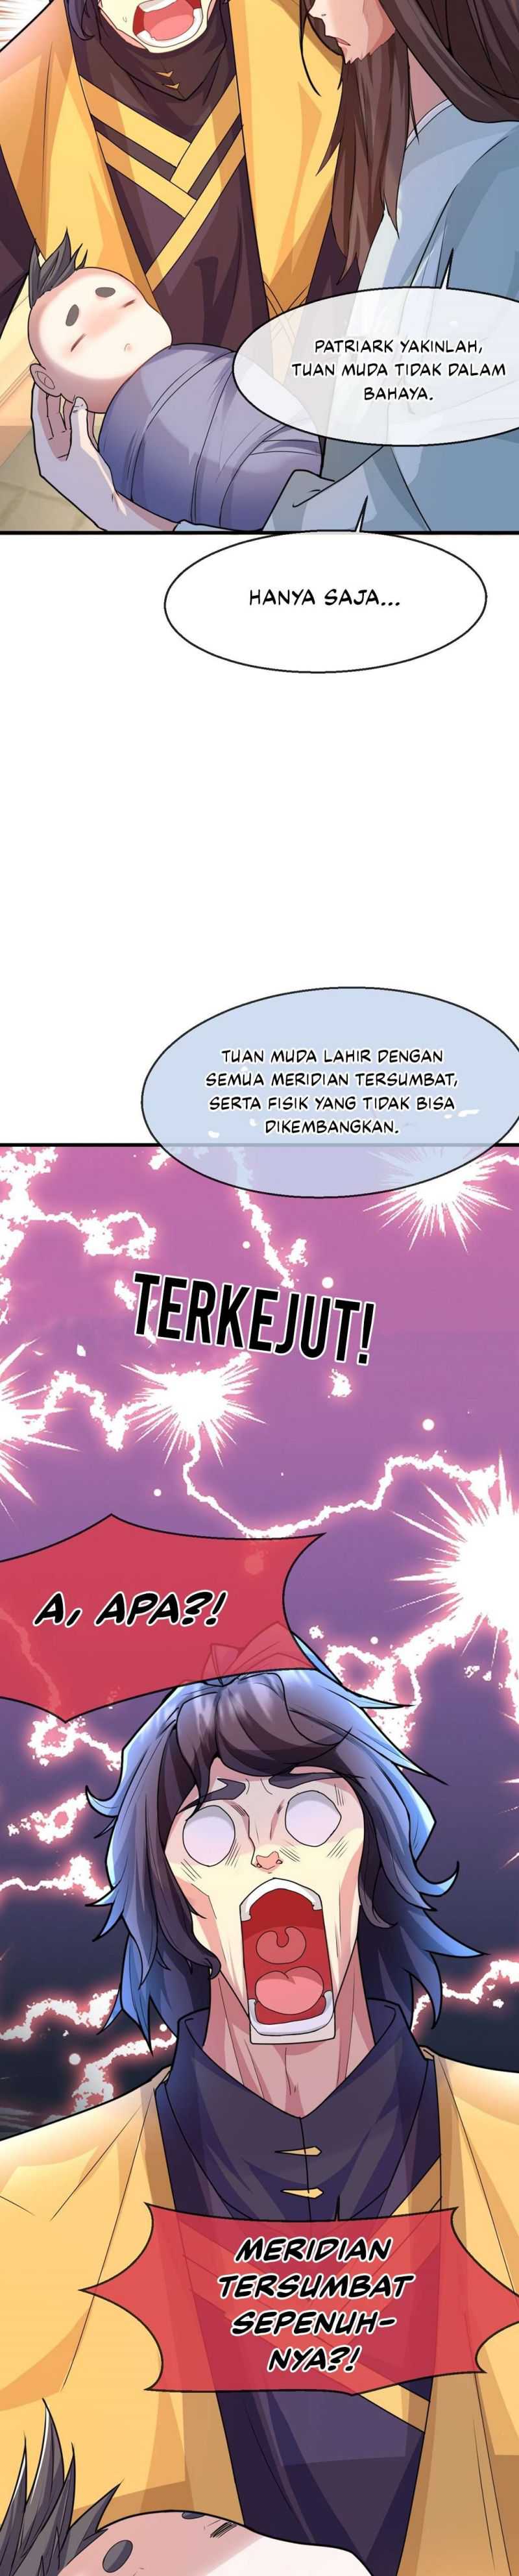 God Emperor Descends I have Billions of Attribute Points Chapter 04 bahasa indonesia